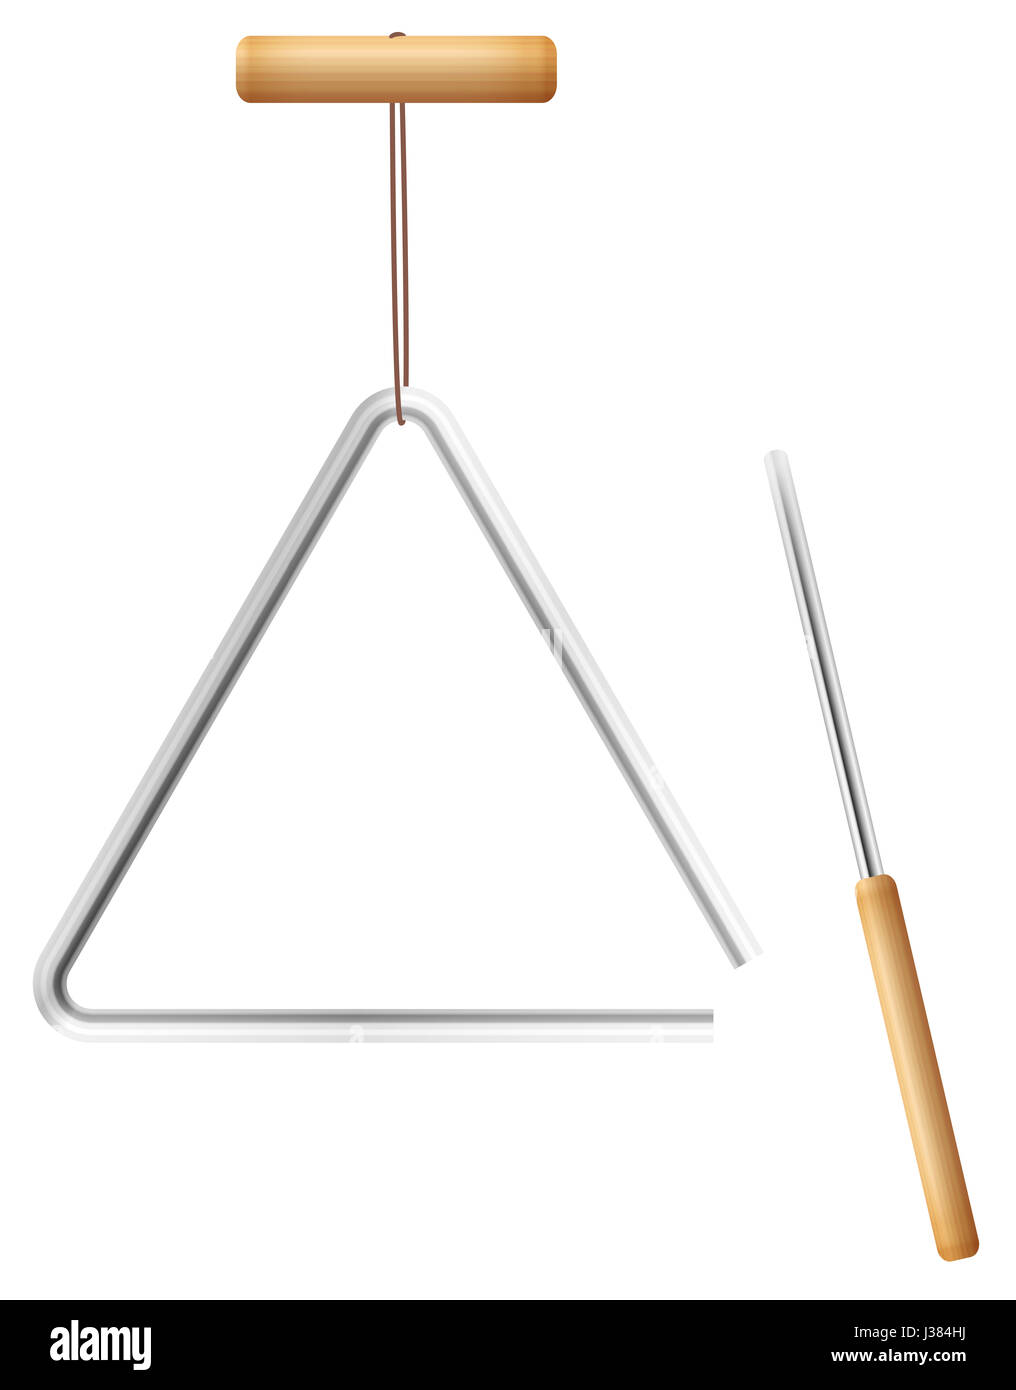 Triangle on a string and metal beater with wooden handle - musical instrument in the percussion family - isolated  illustration on white background. Stock Photo